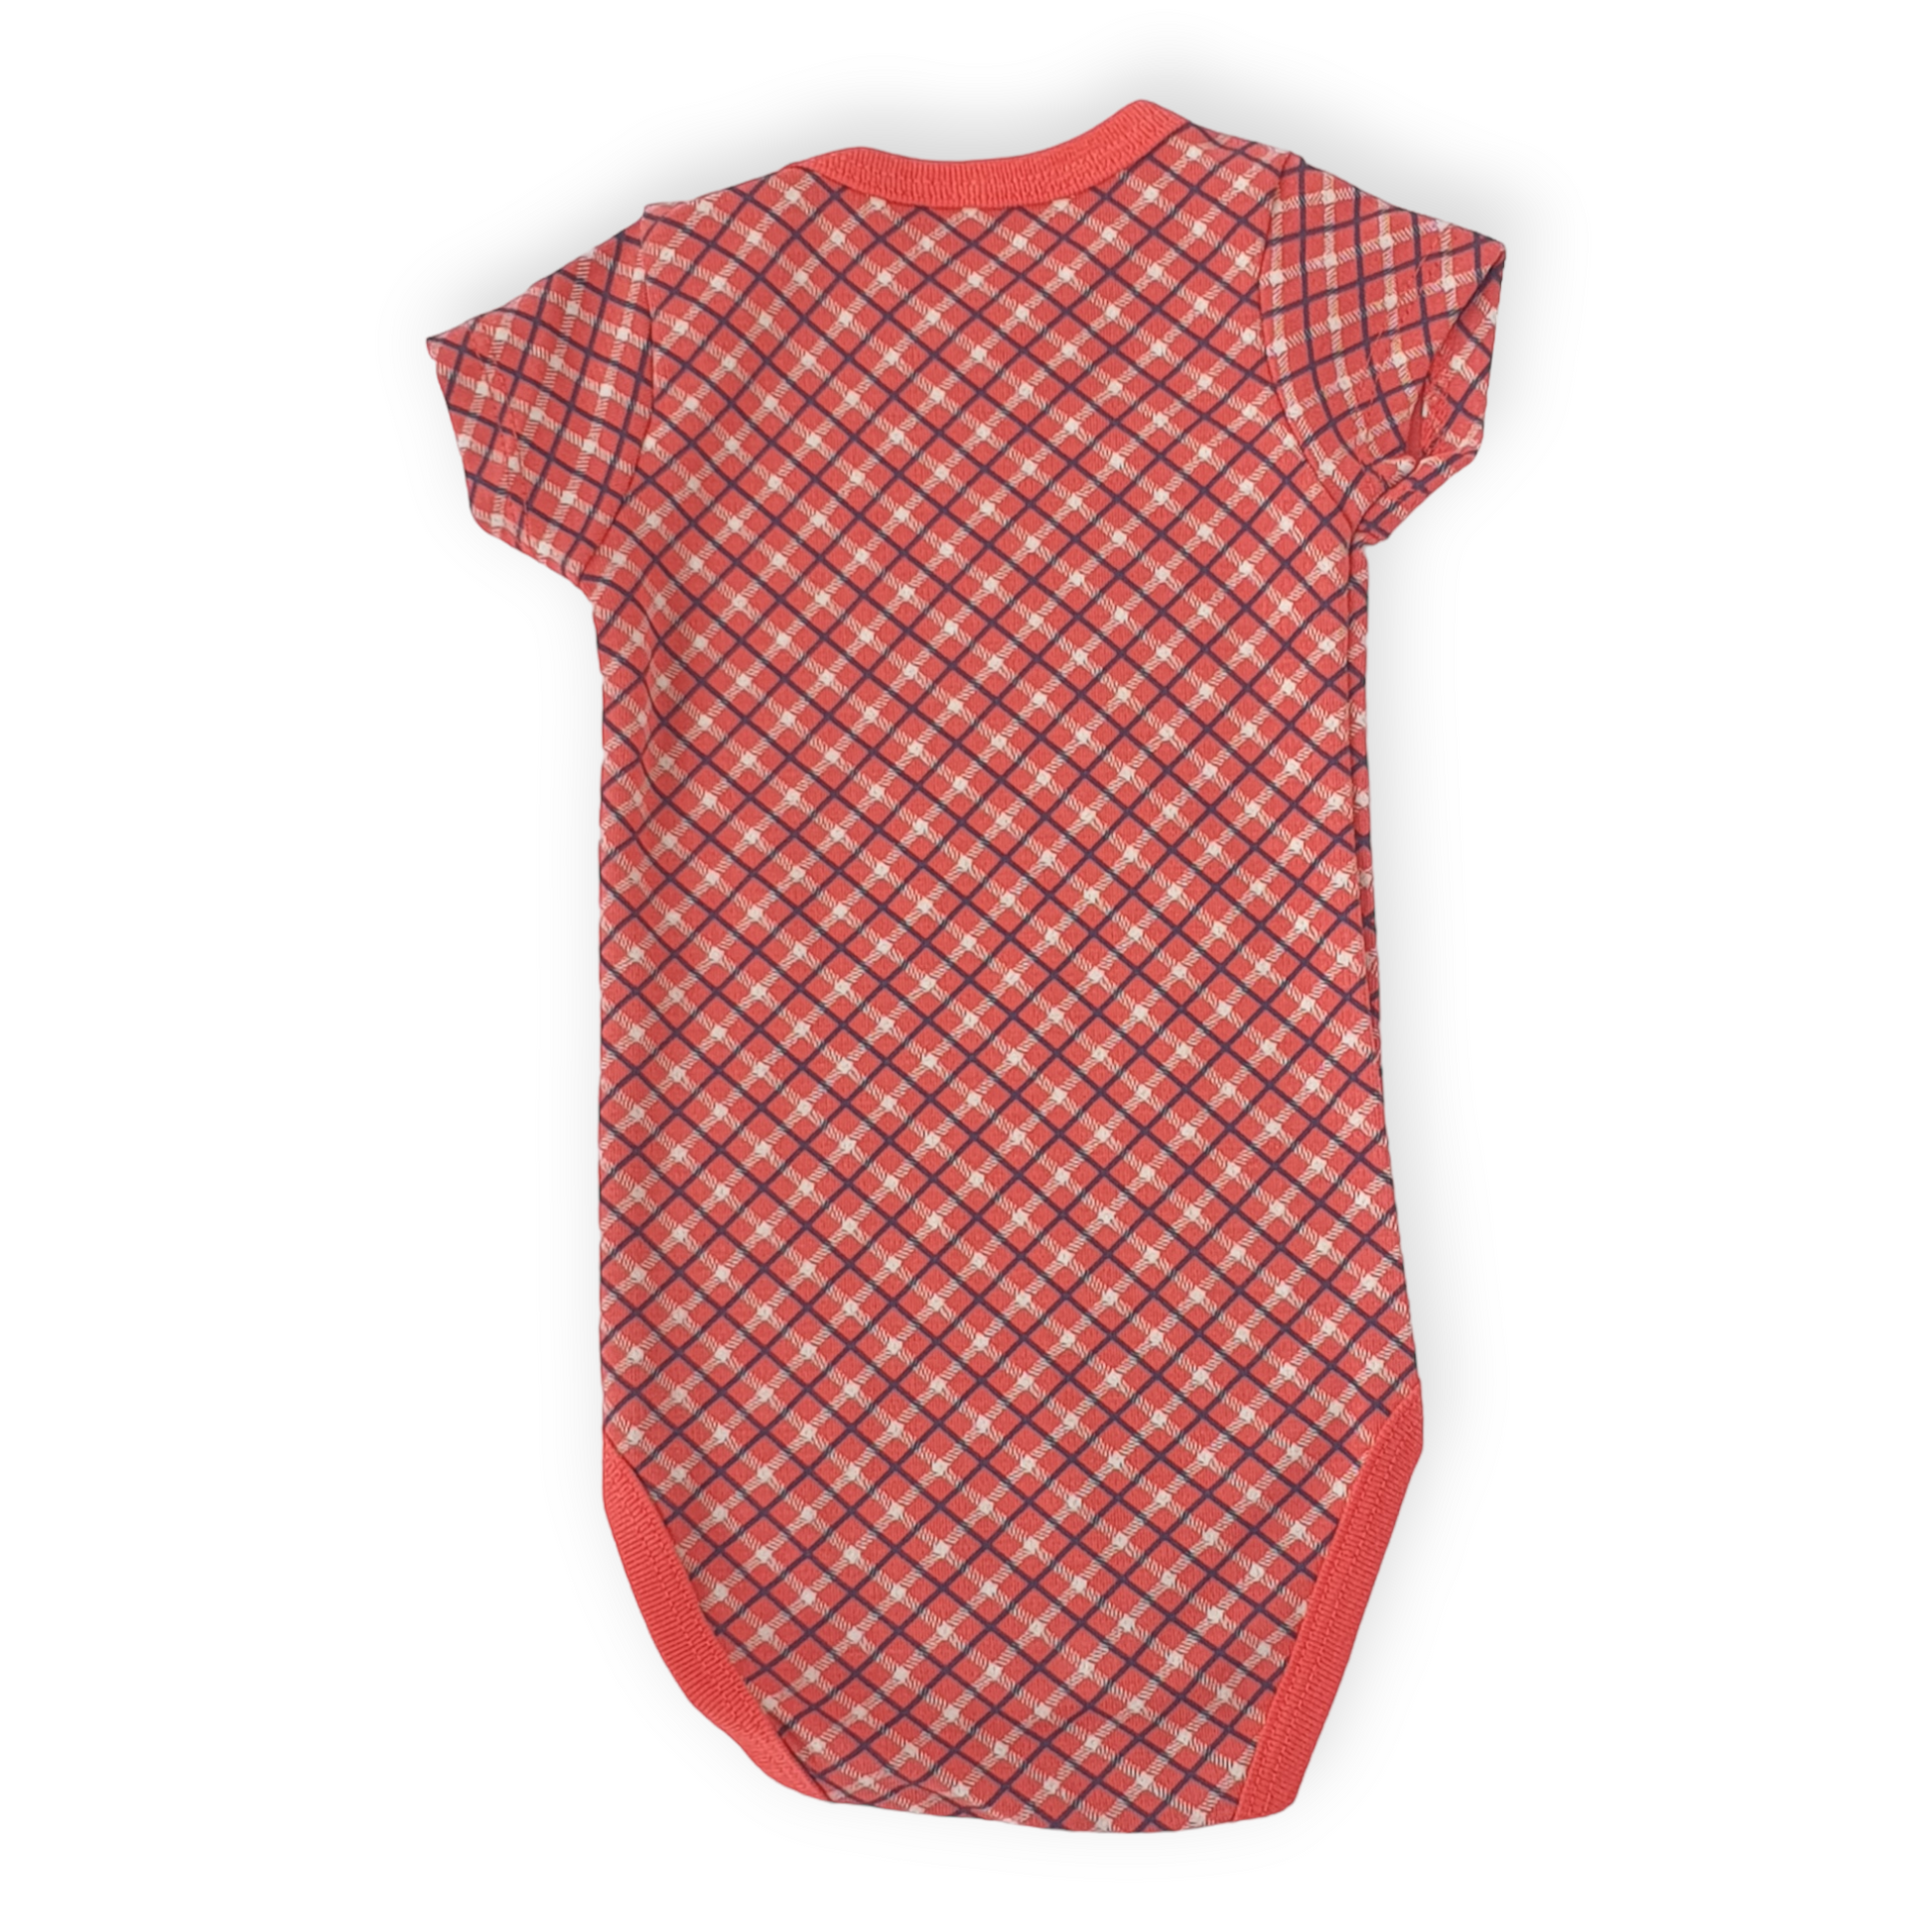 Red Square Patterned Body-Black, Body, Bodysuit, Boy, Catboy, Catgirl, Catunisex, Creeper, Girl, Grey, Onesie, Short Sleeve, SS23, Tie-Fuar Baby-[Too Twee]-[Tootwee]-[baby]-[newborn]-[clothes]-[essentials]-[toys]-[Lebanon]